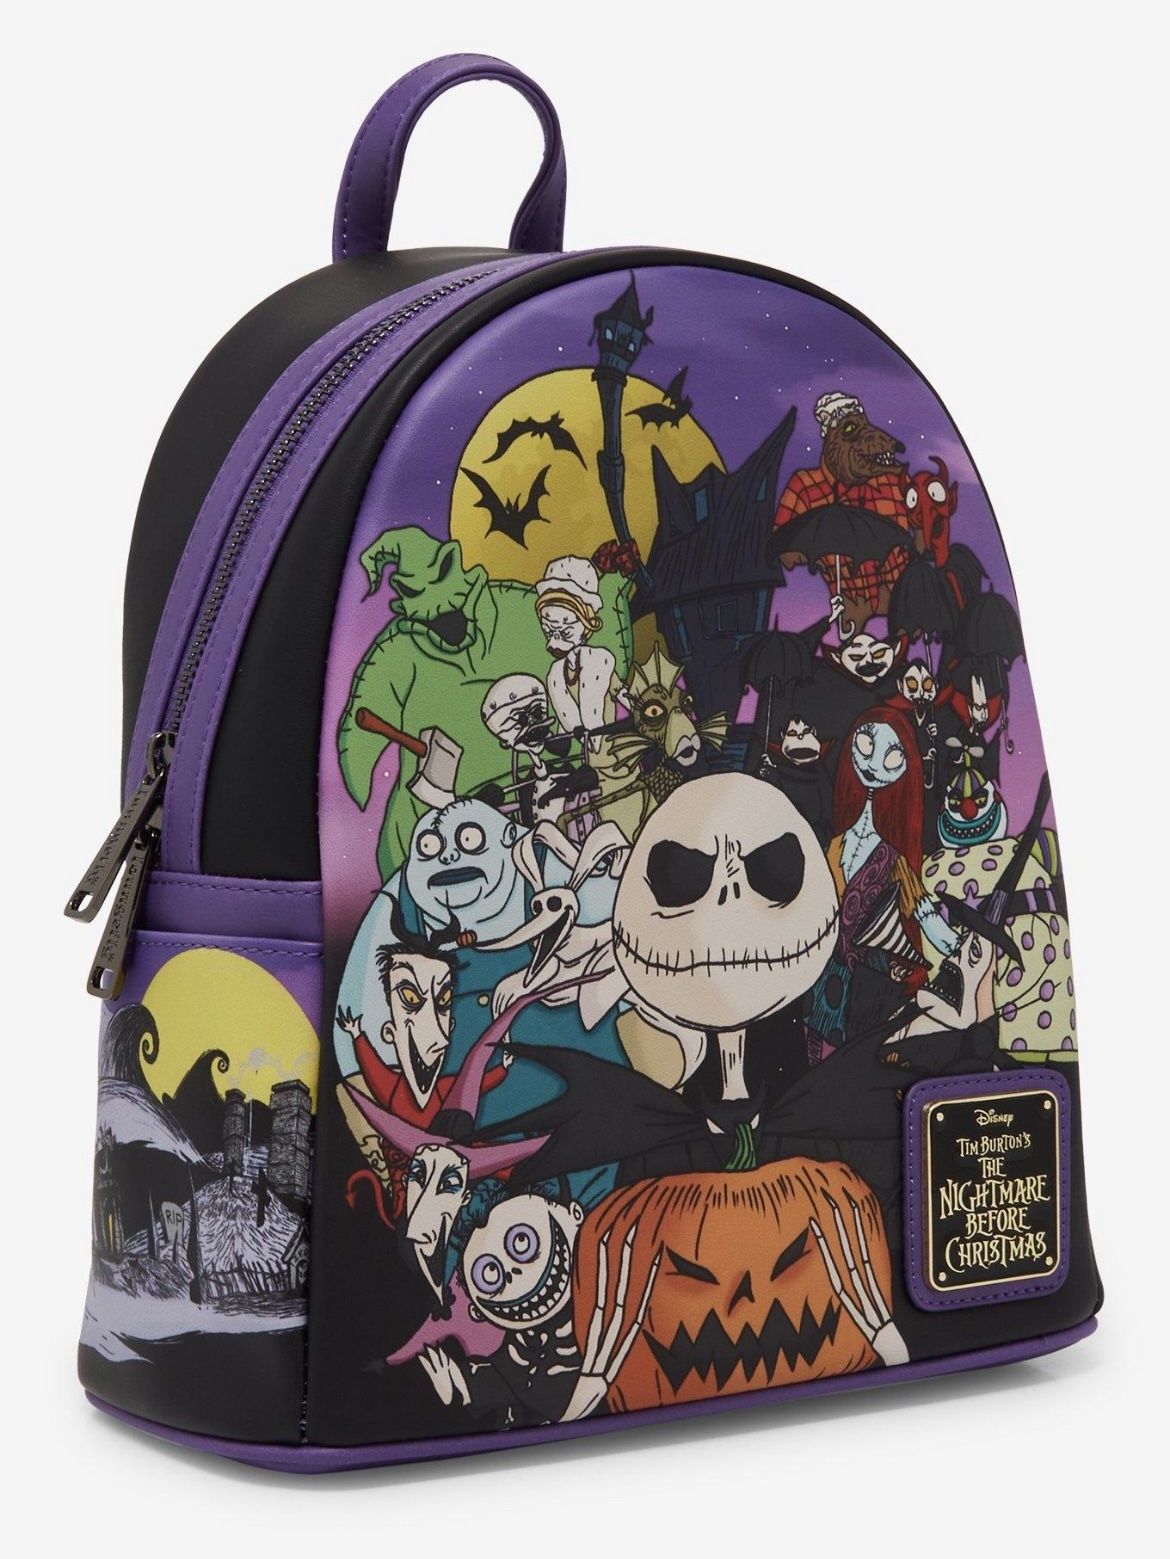 Nightmare Before Christmas Loungefly Holiday Backpack Purse